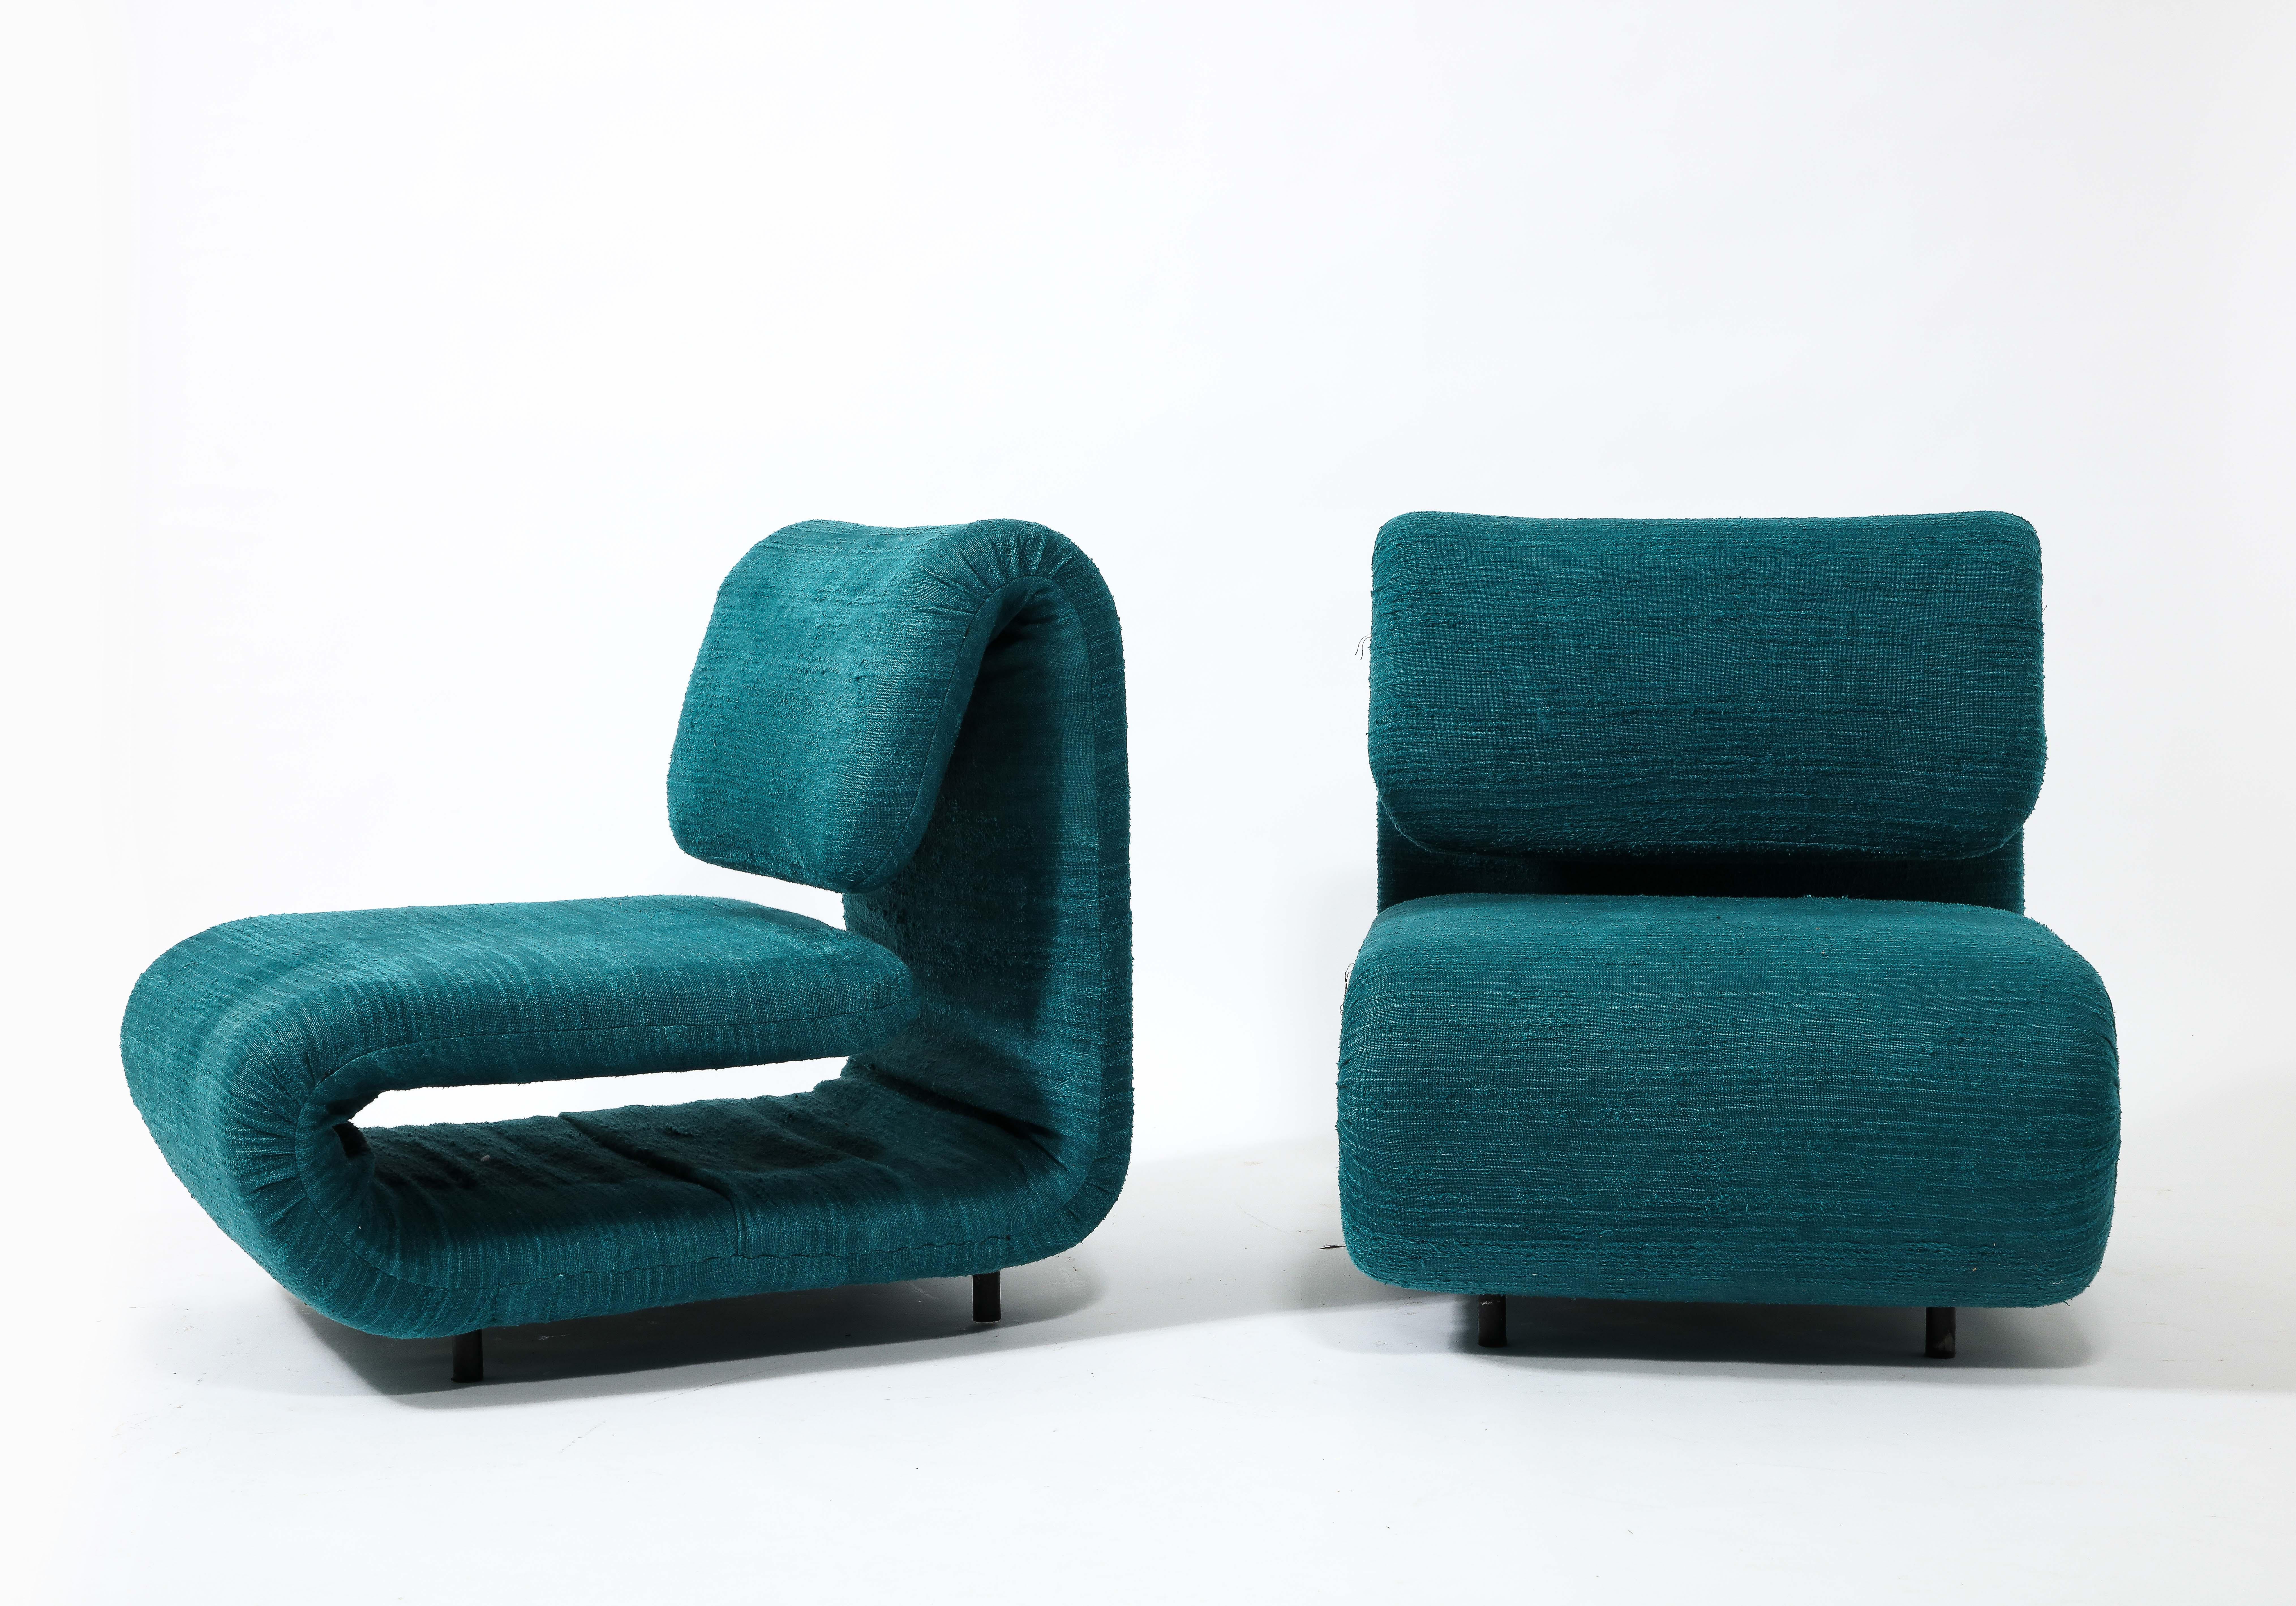 Steel Etienne-Henri Martin Pair of 1500 Slipper Lounge Chairs in Teal, France 1960's For Sale